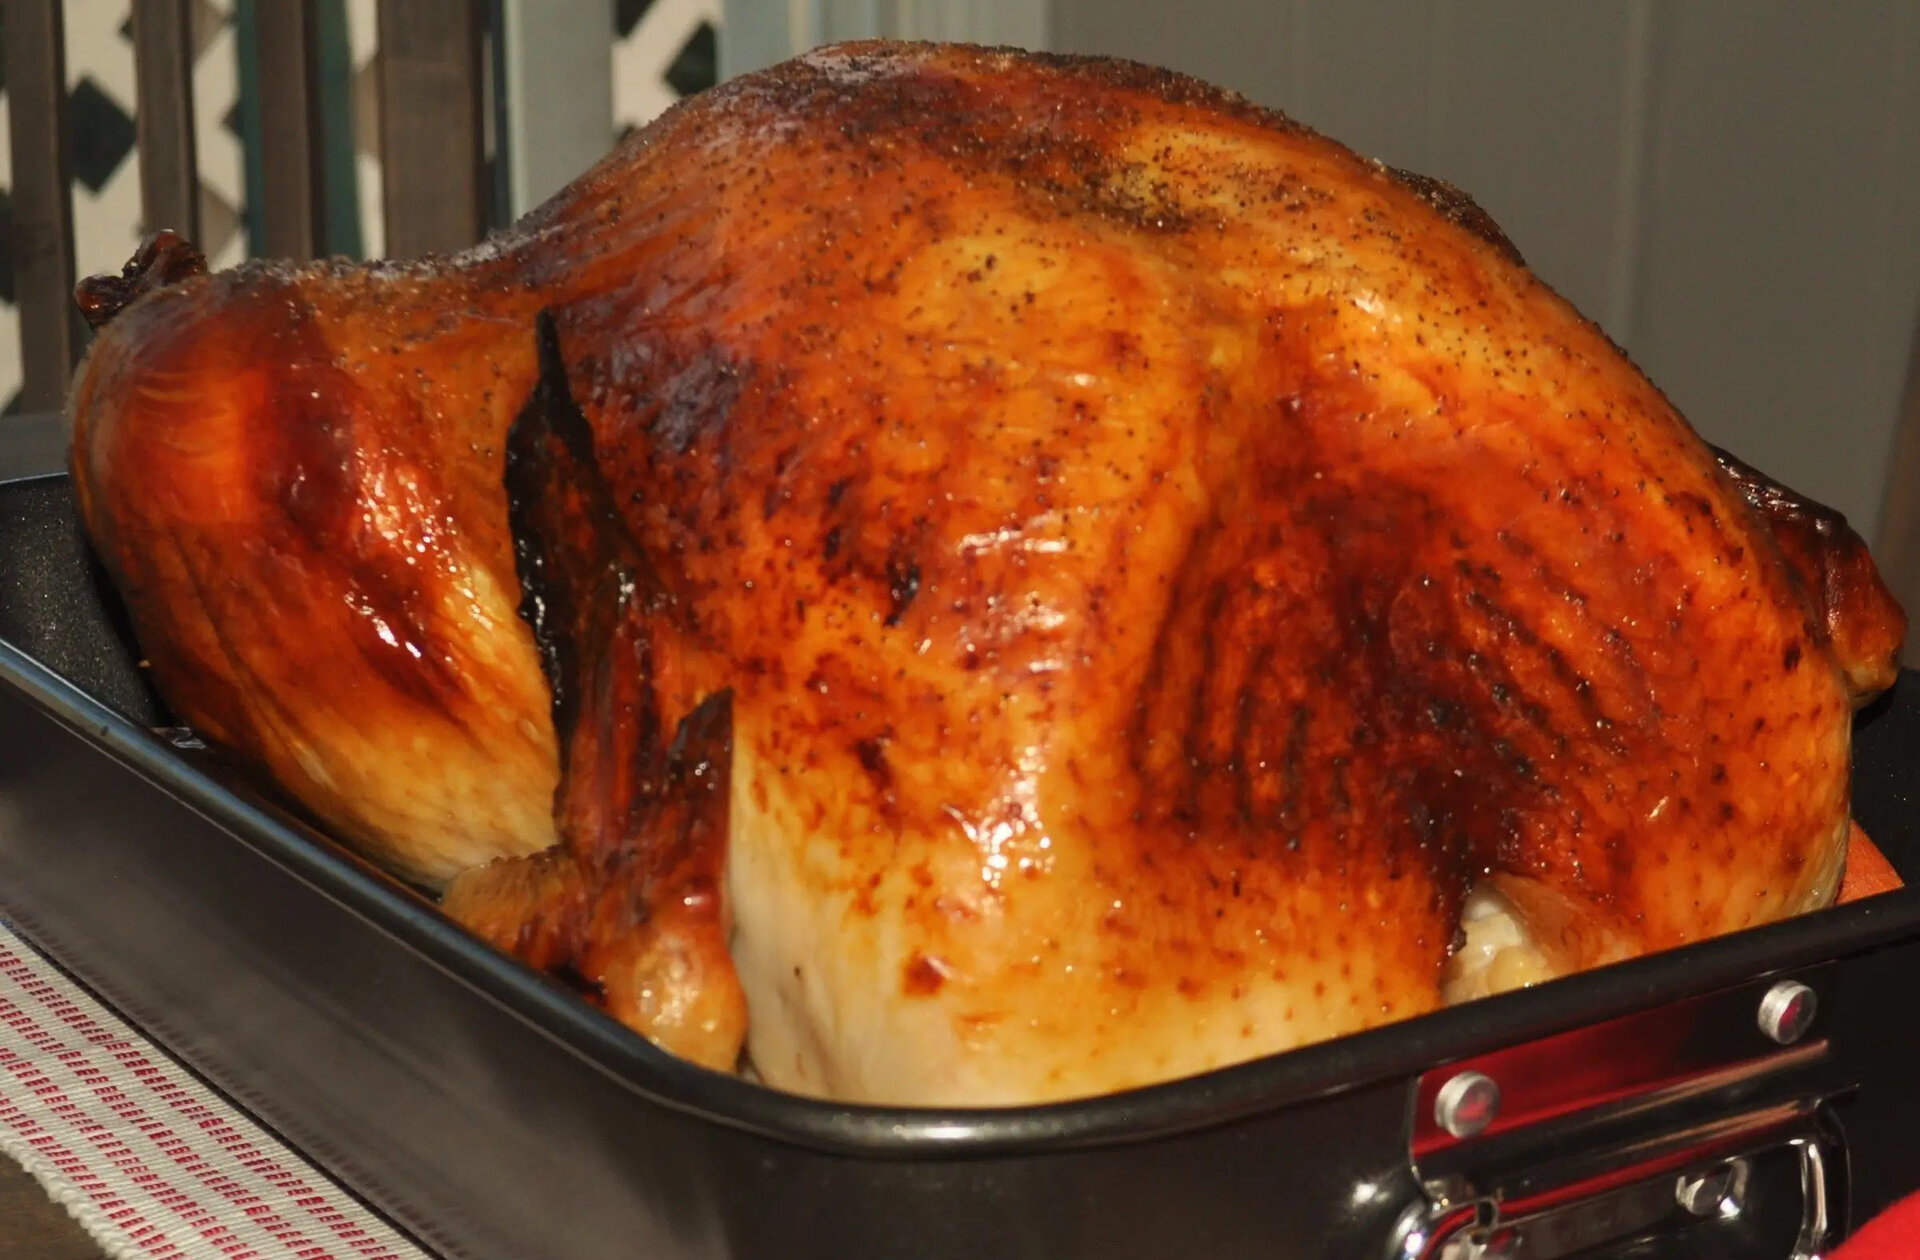 How To Cook A Turkey In An Electric Skillet